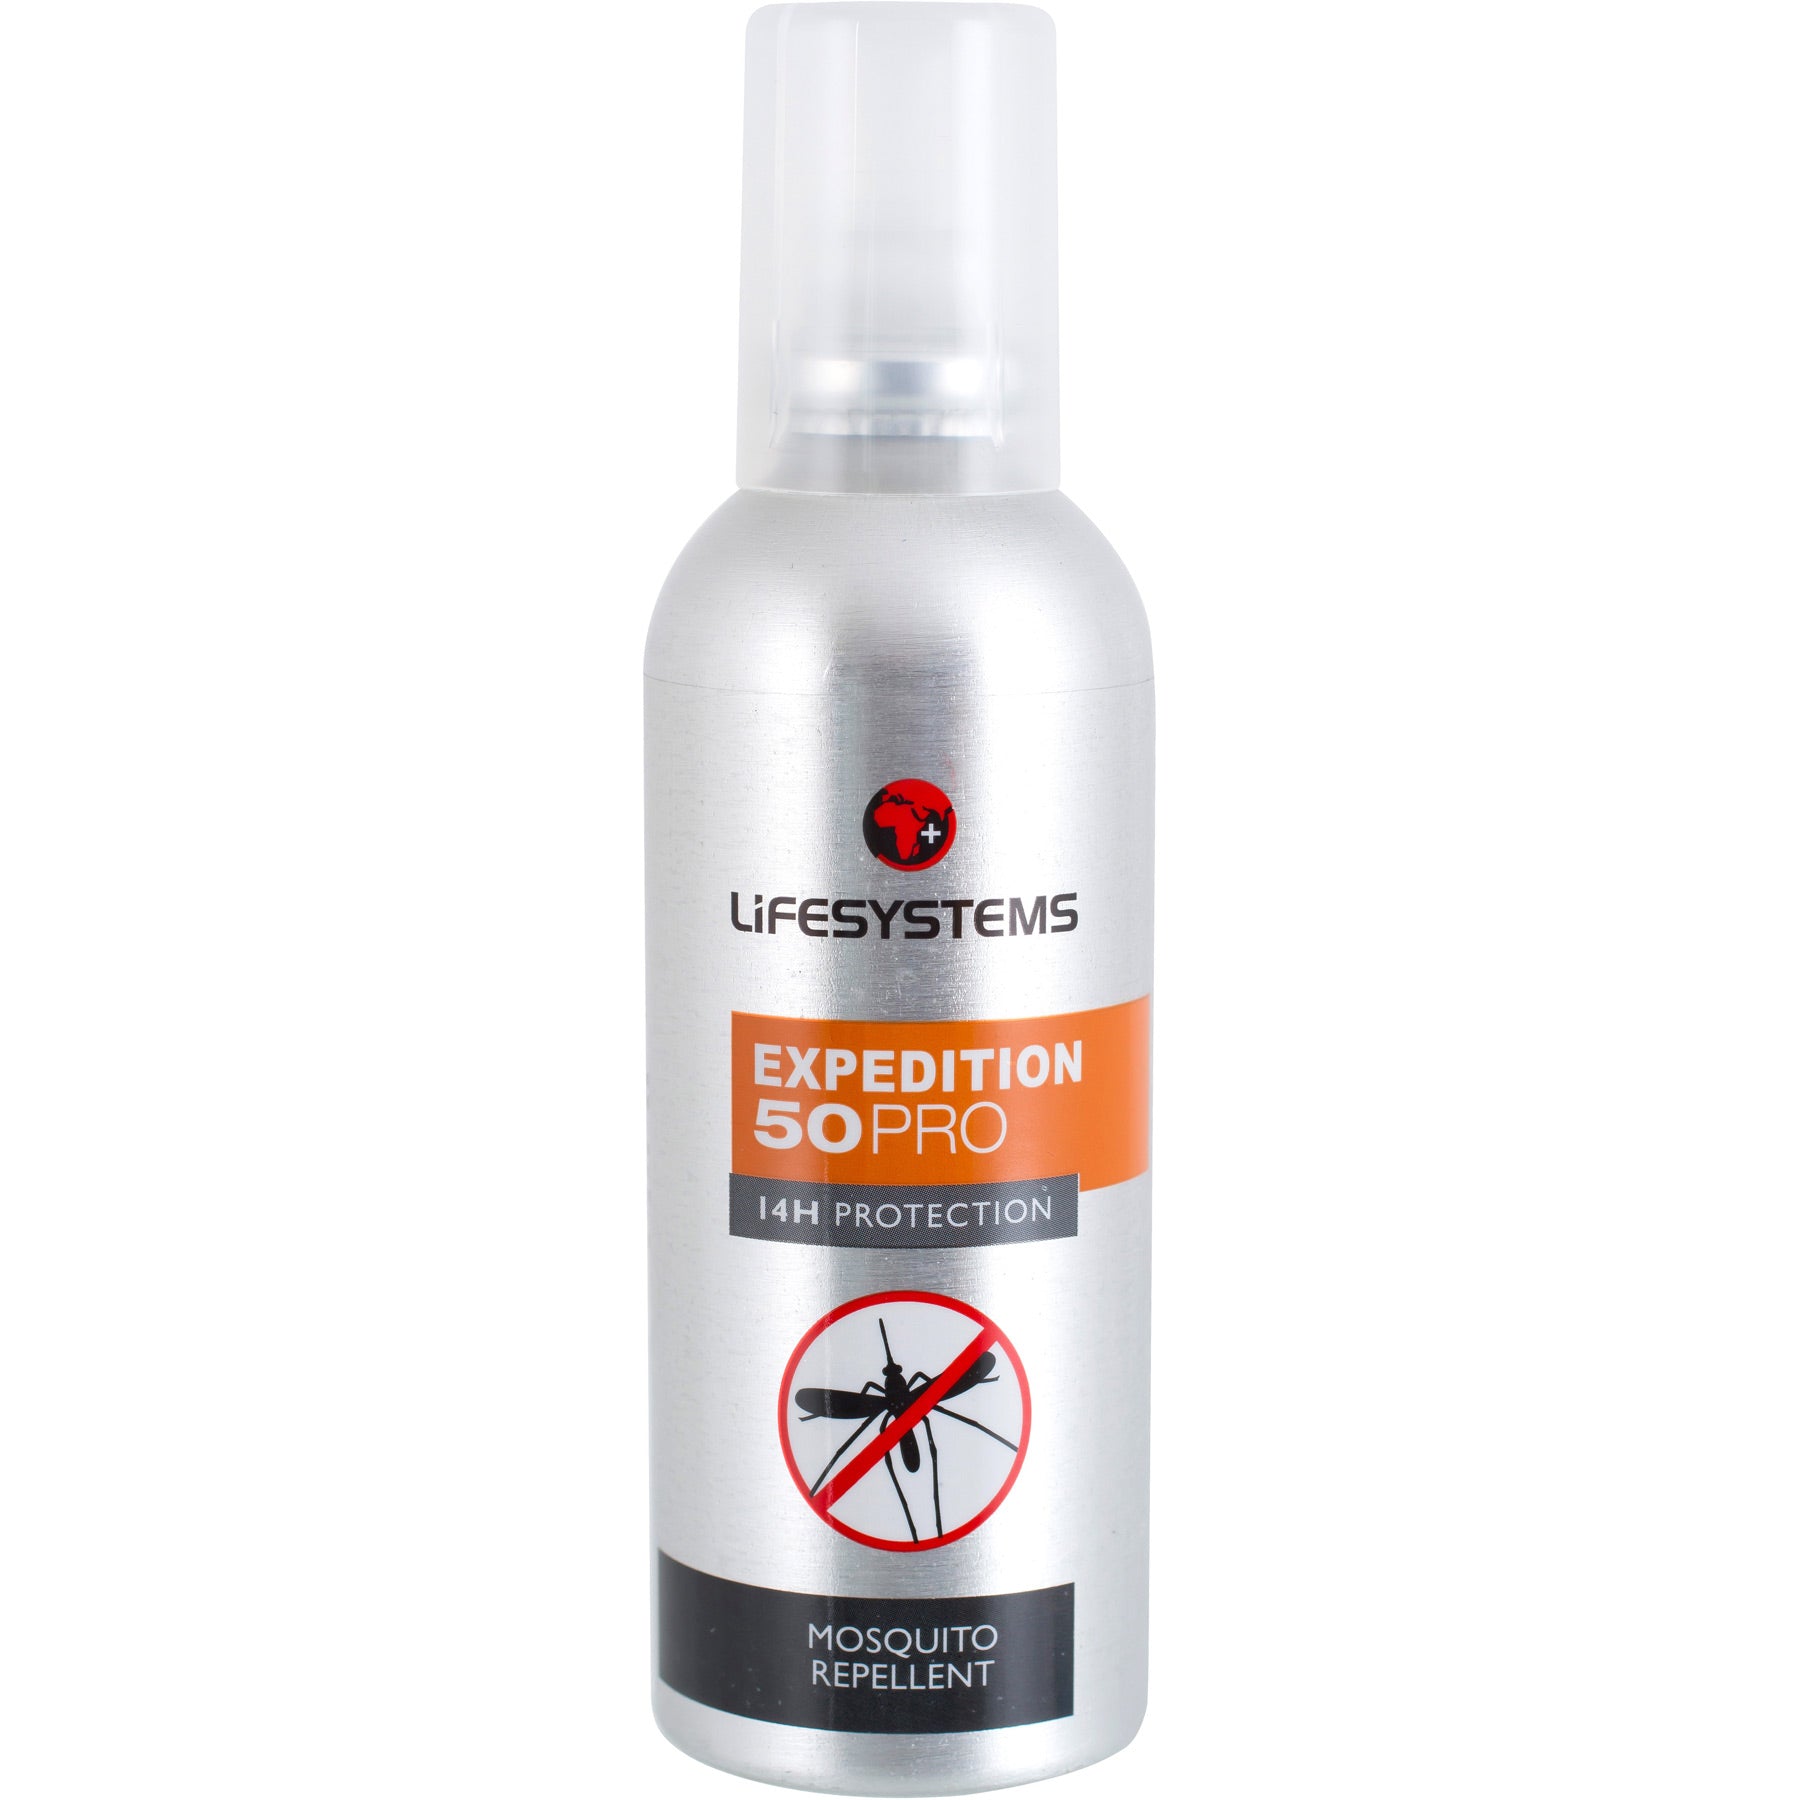 Lifesystems Expedition 50 PRO Insect Repellent